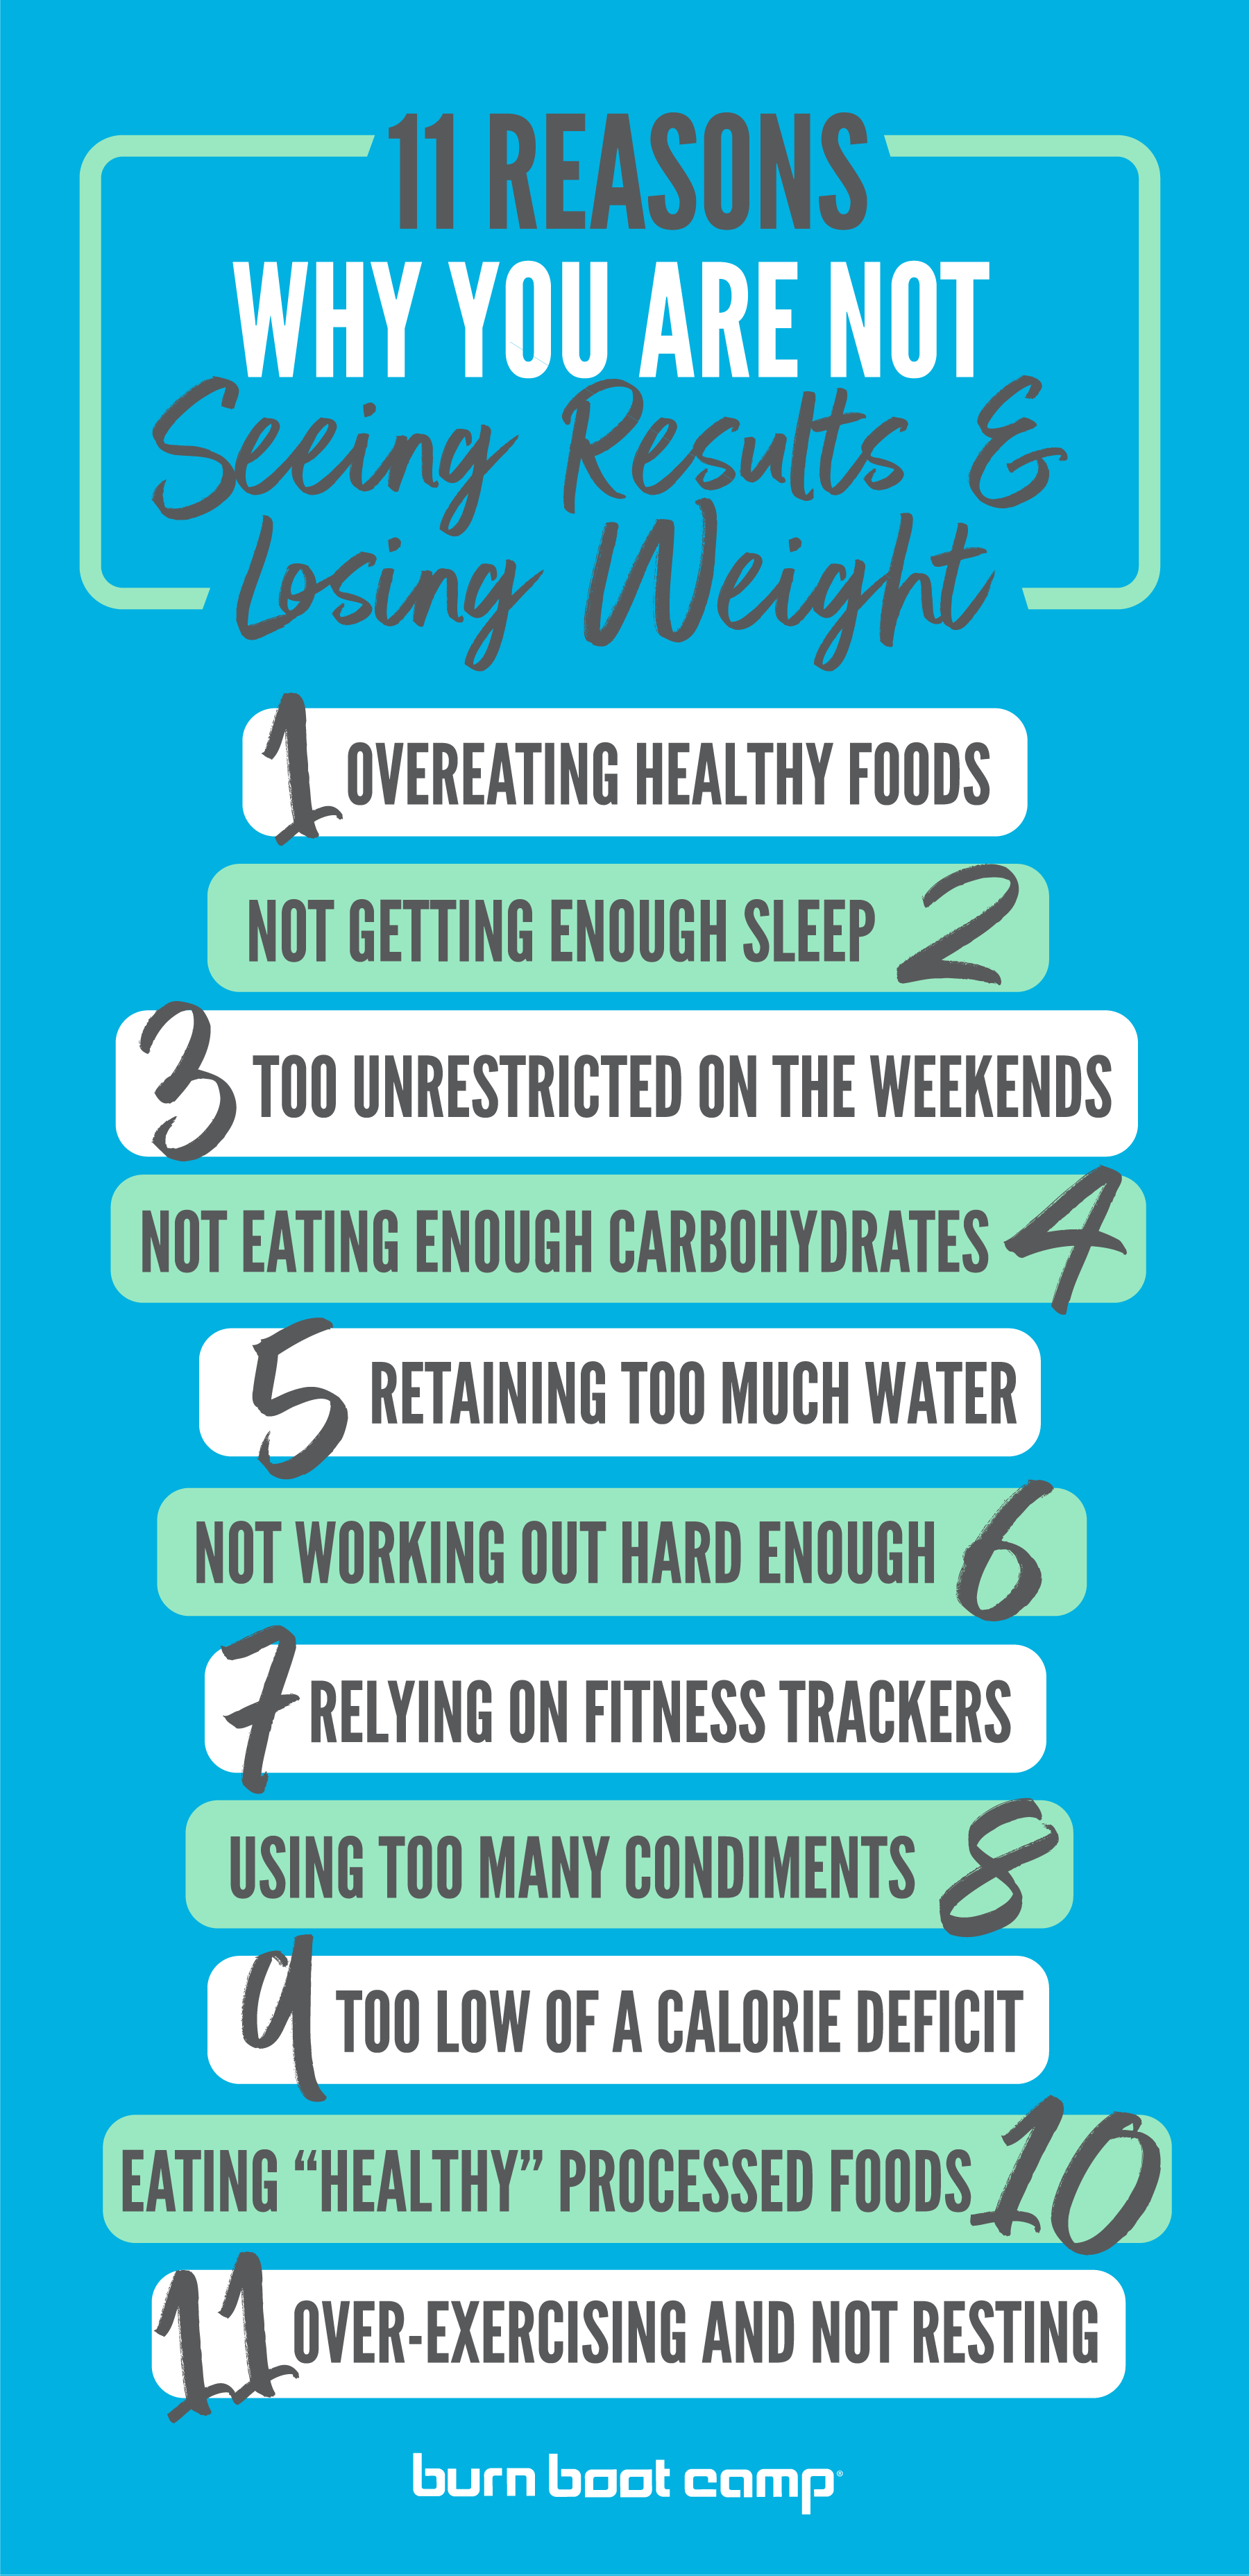 Infographic of the 11 reasons why you are not seeing results and losing weight